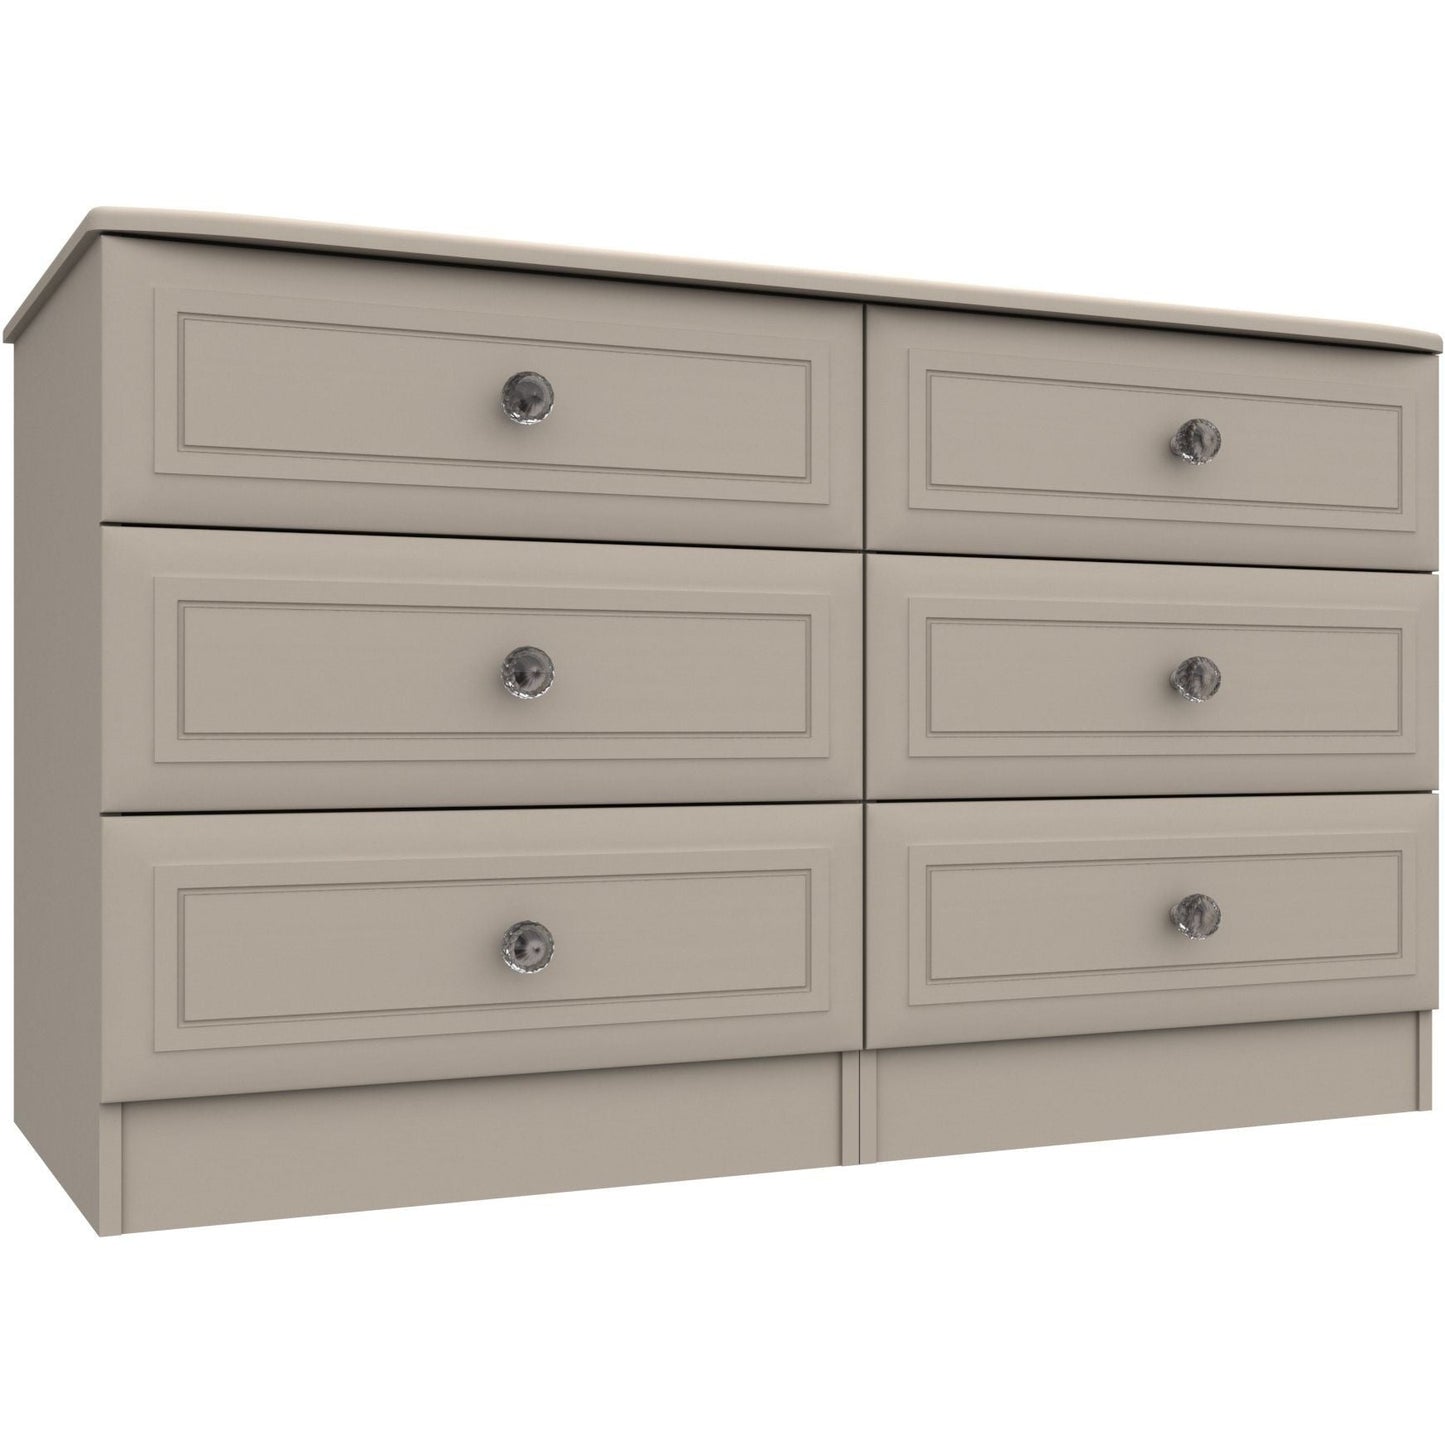 Hadleigh 3 Drawer Double Chest